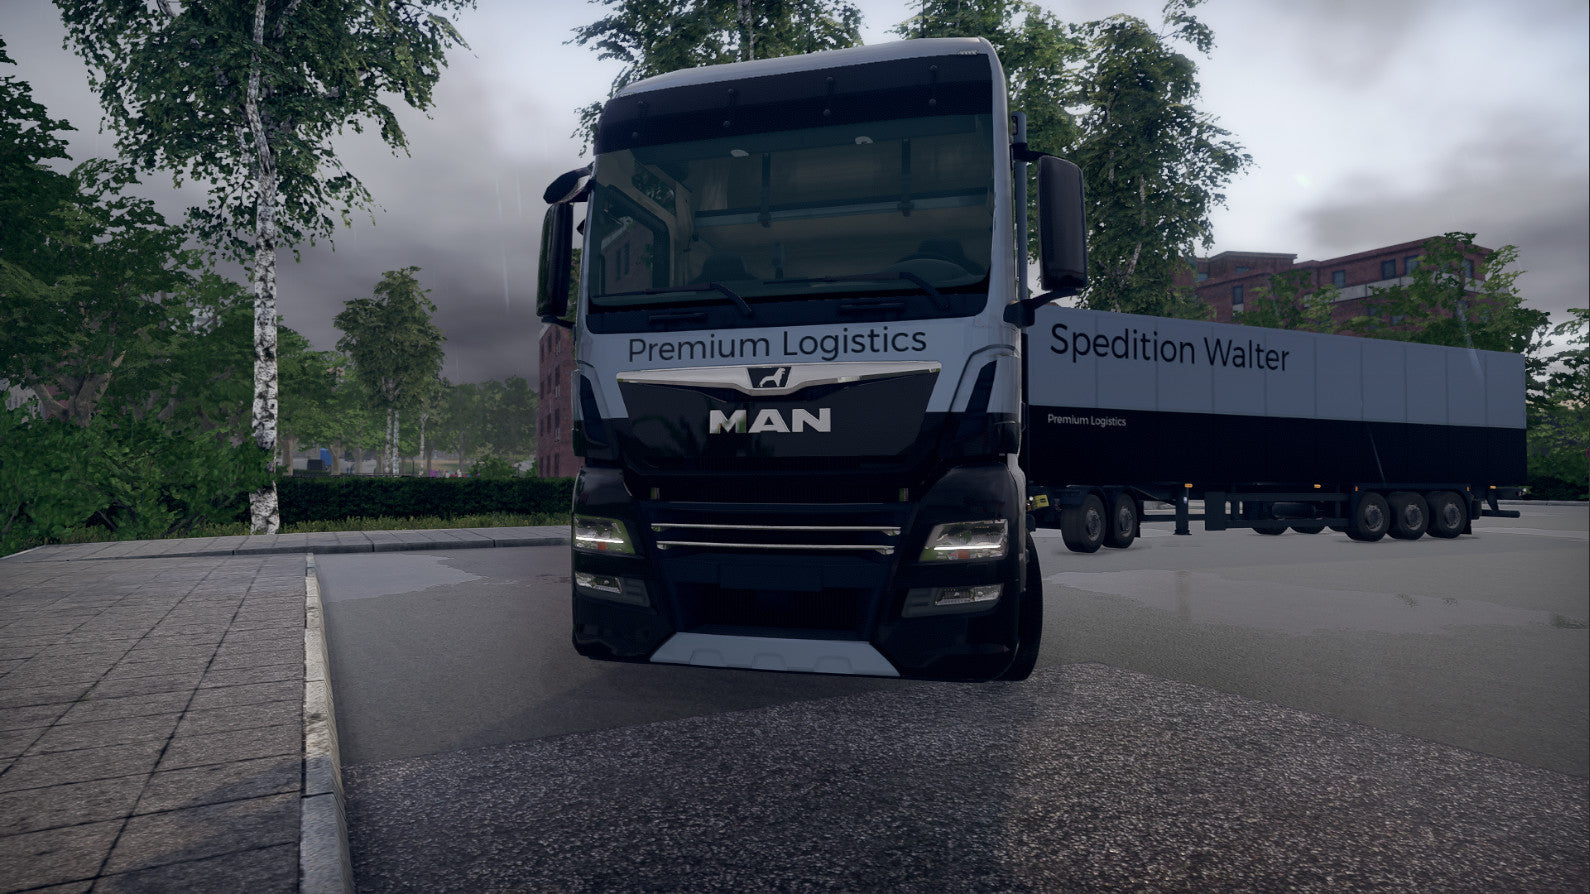 ON THE ROAD - The Truck Simulator